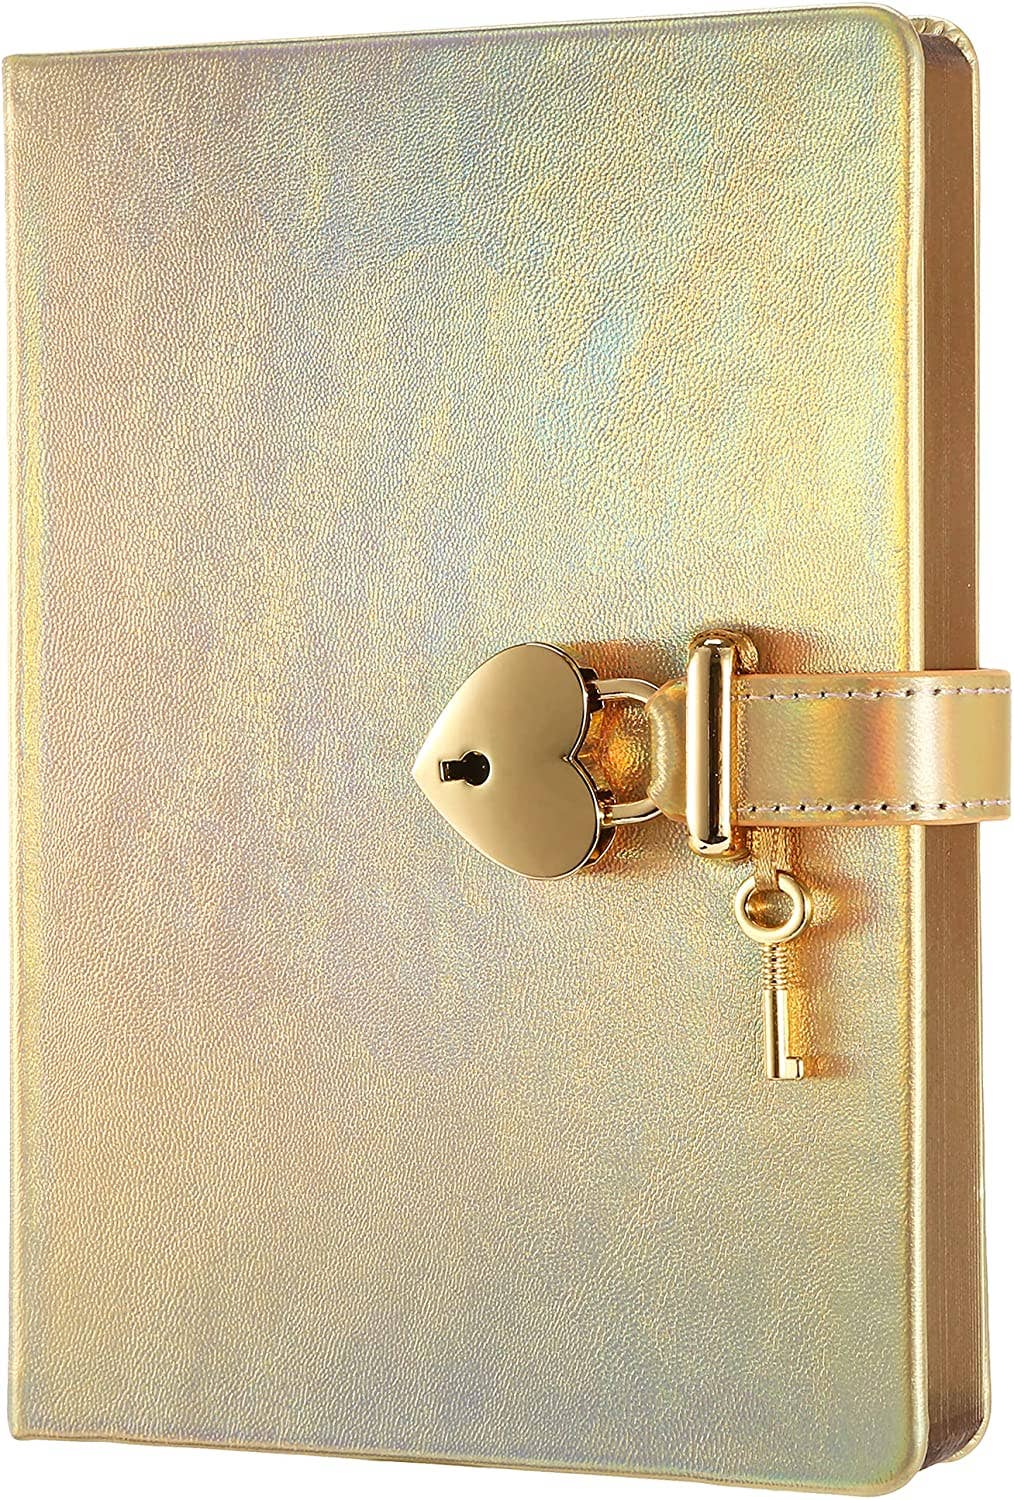 Heart Lock Diary for Girls with Key Vegan Cover (Iridescent)